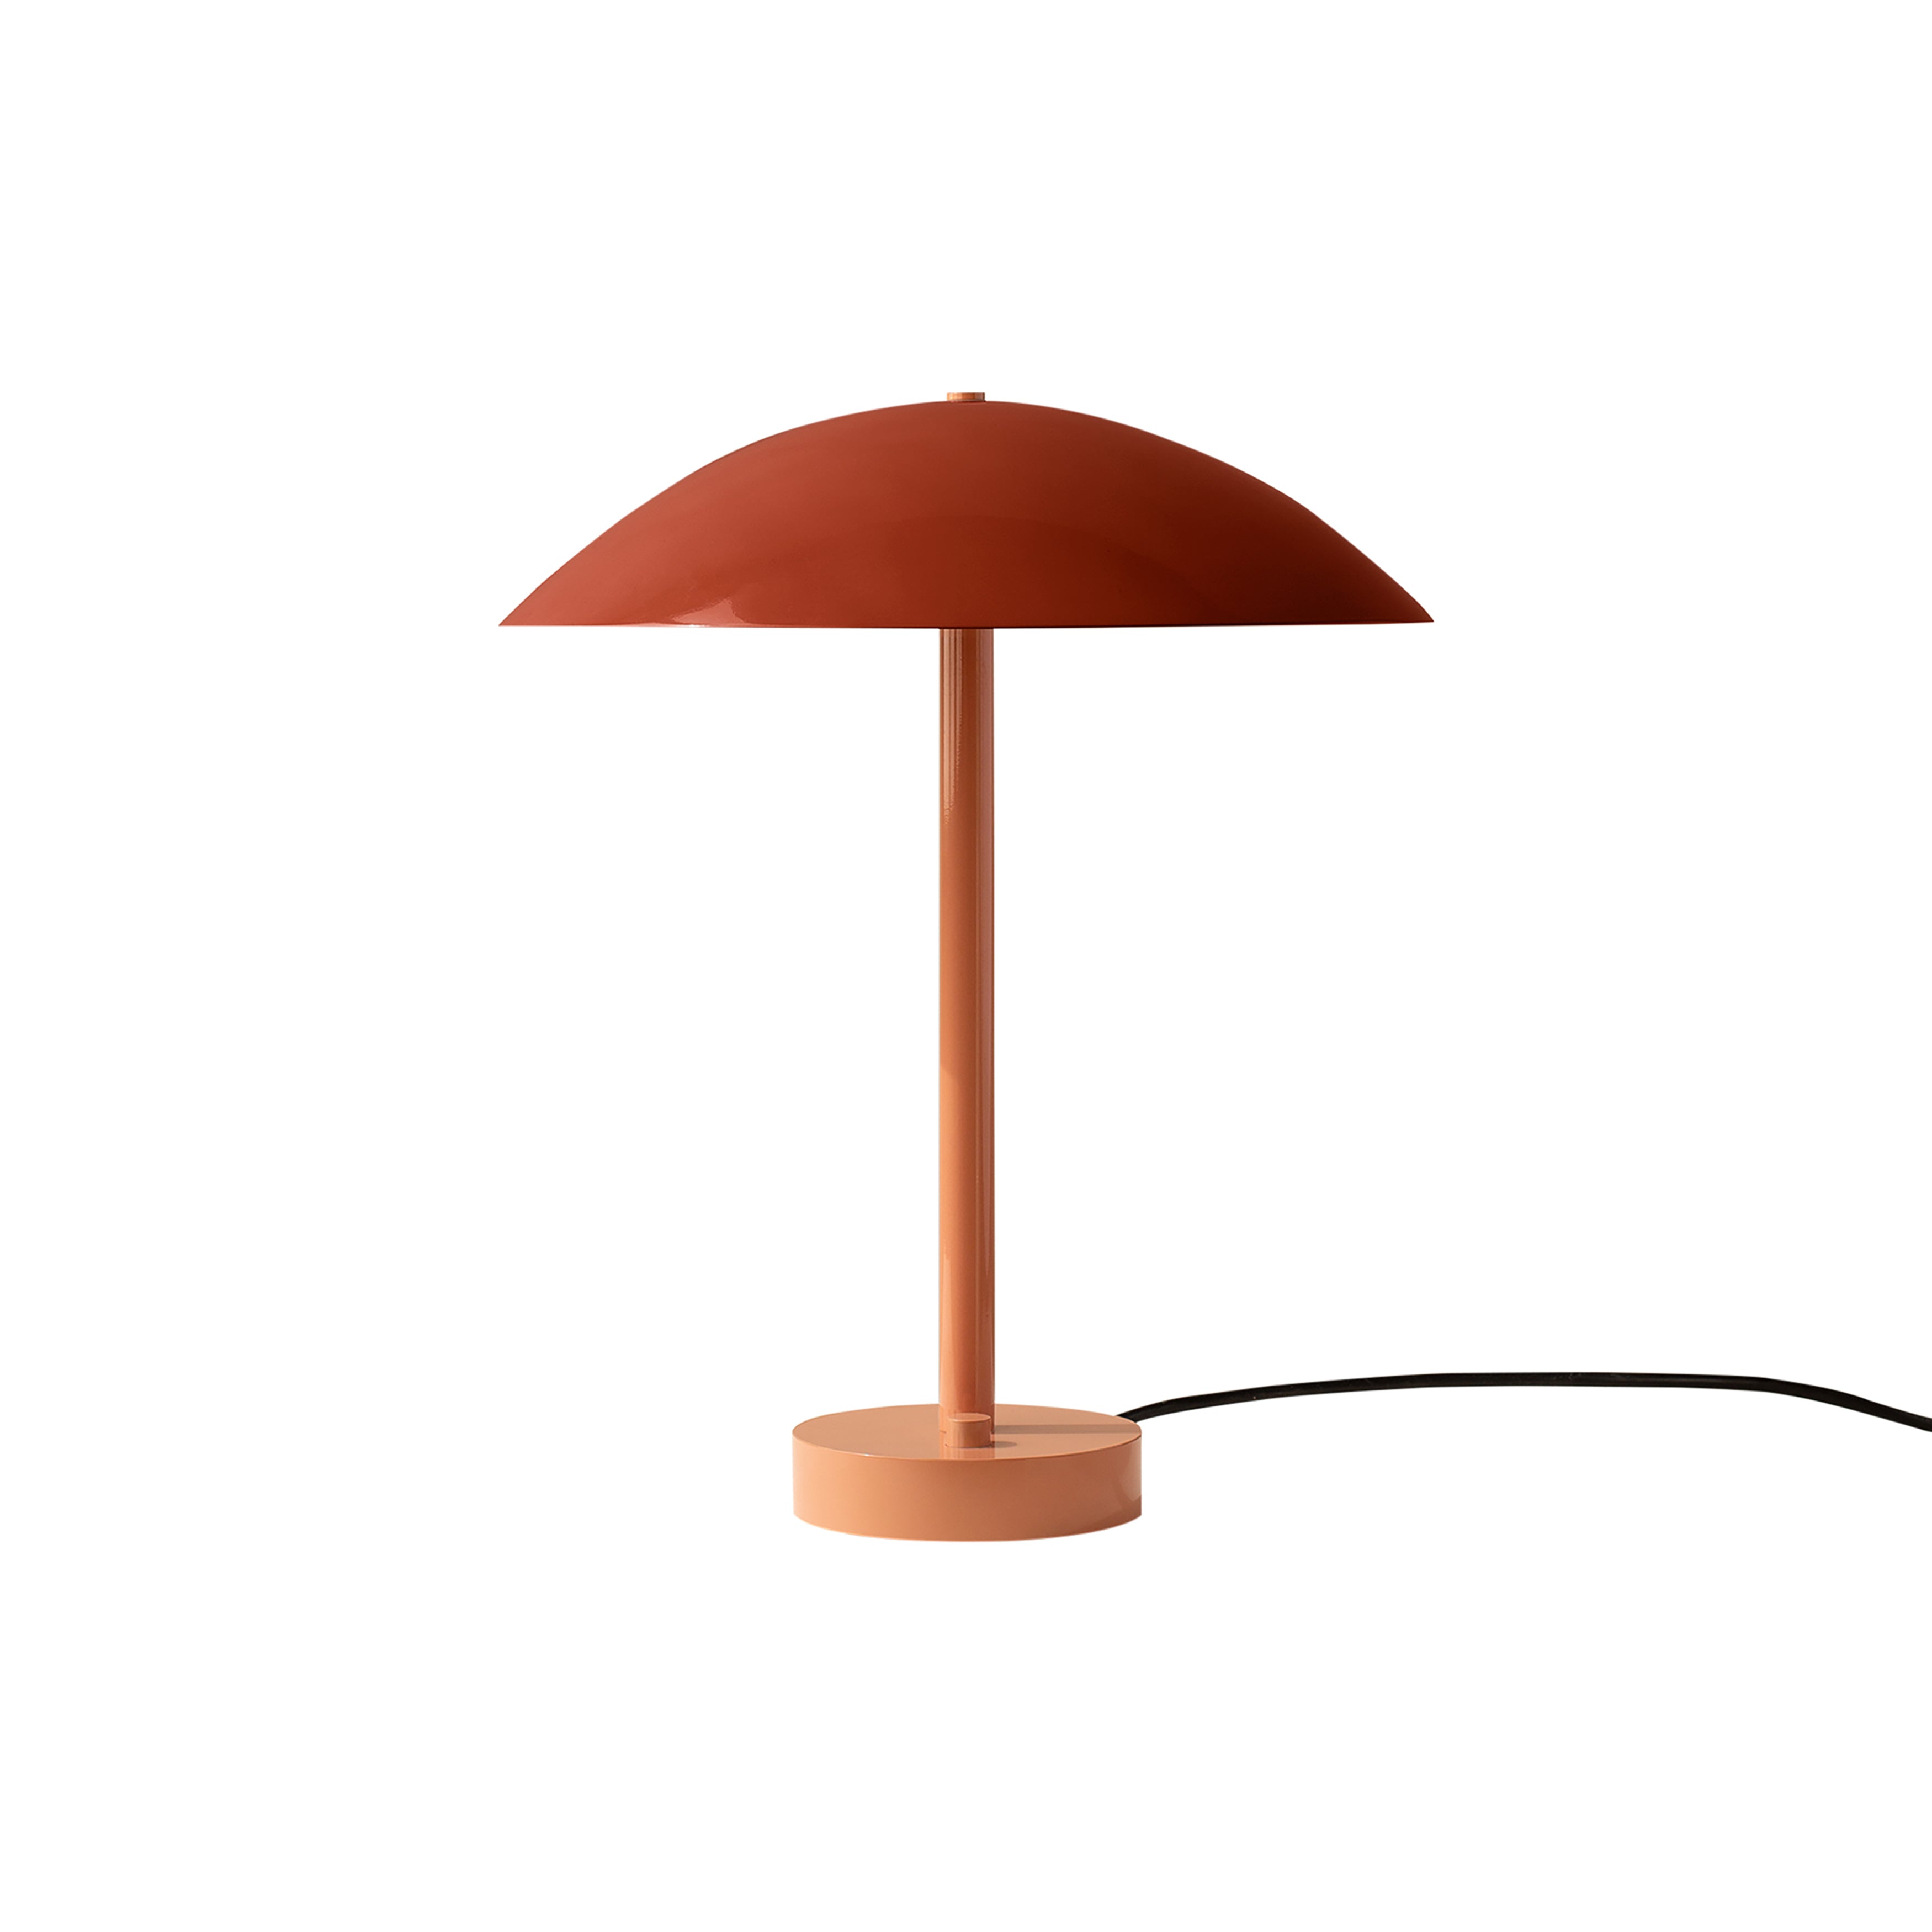 Arundel Table Lamp: Oxide Red + Peach